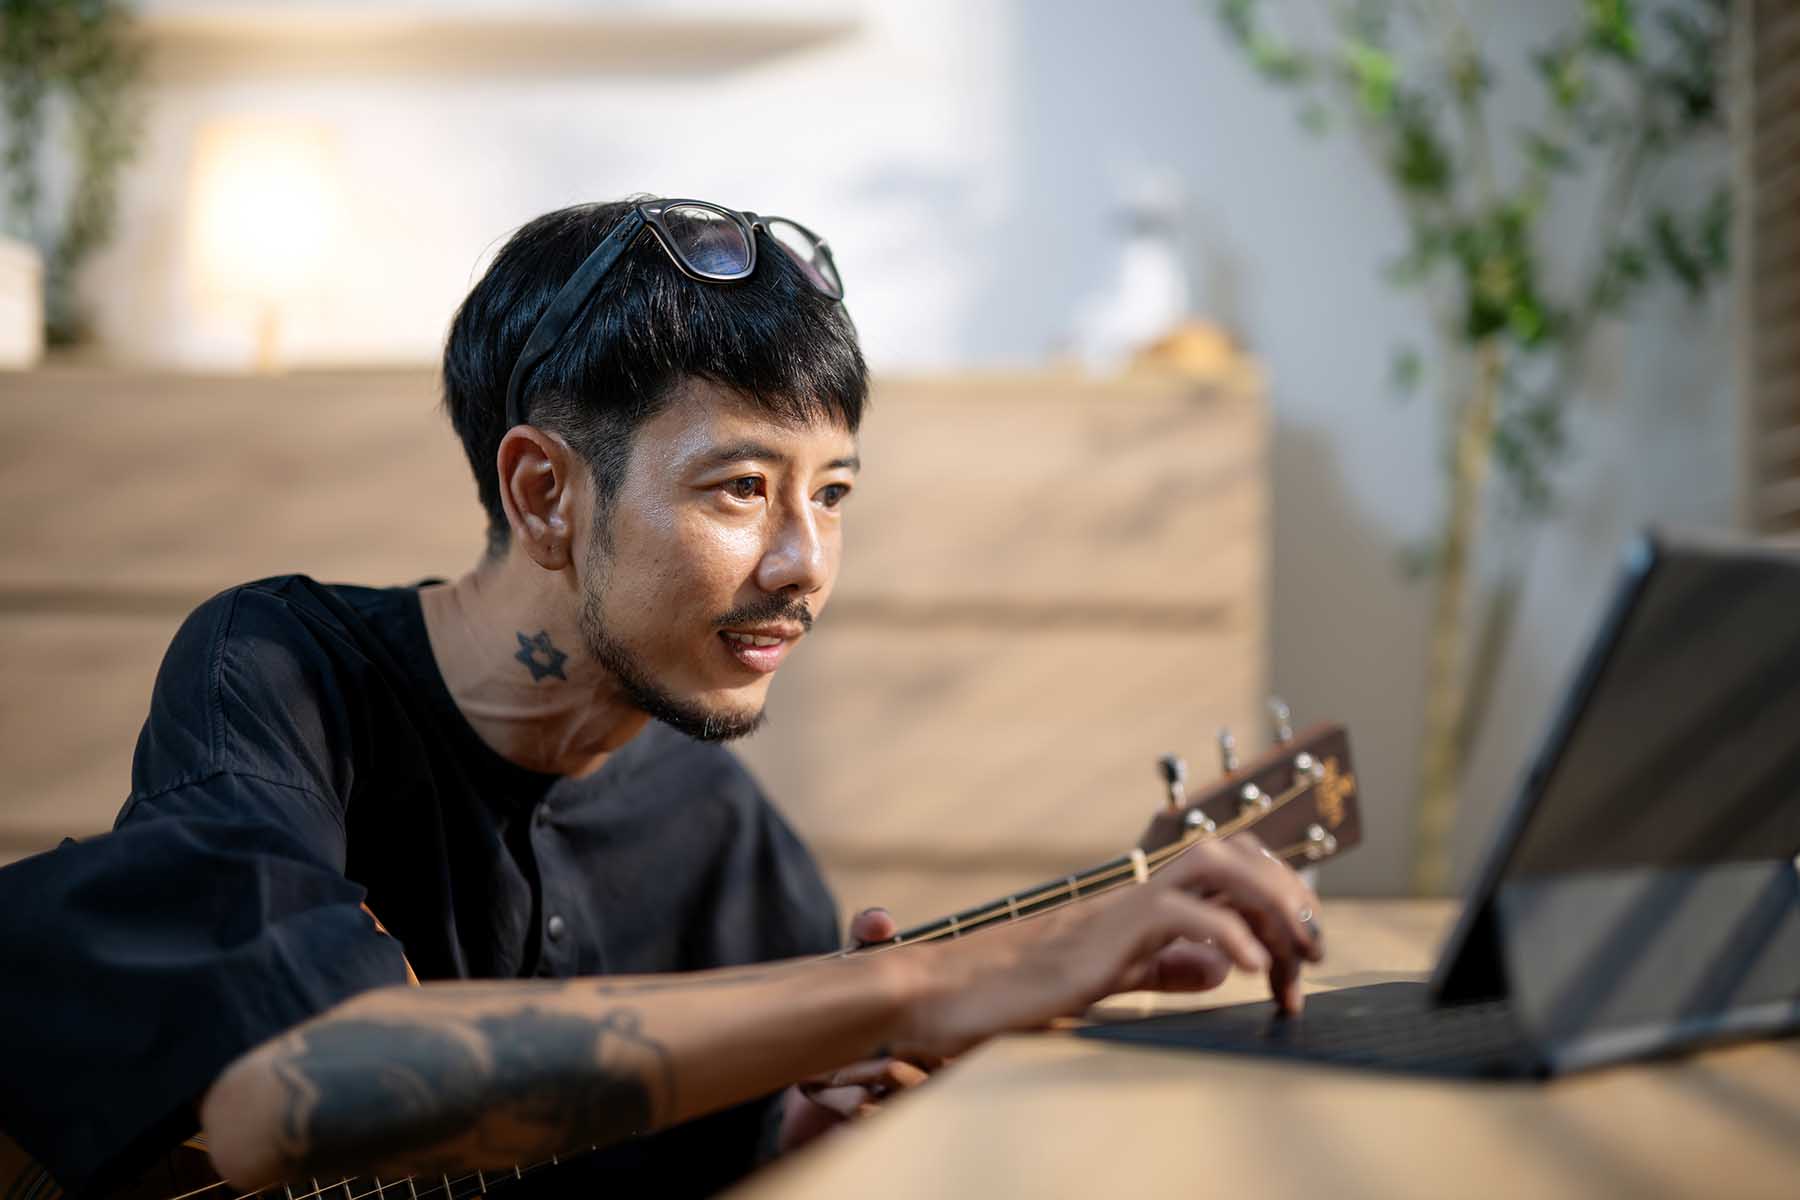 Smiling composer is sitting on the floor, holding his guitar on his lap, and writing down a music score on his laptop.